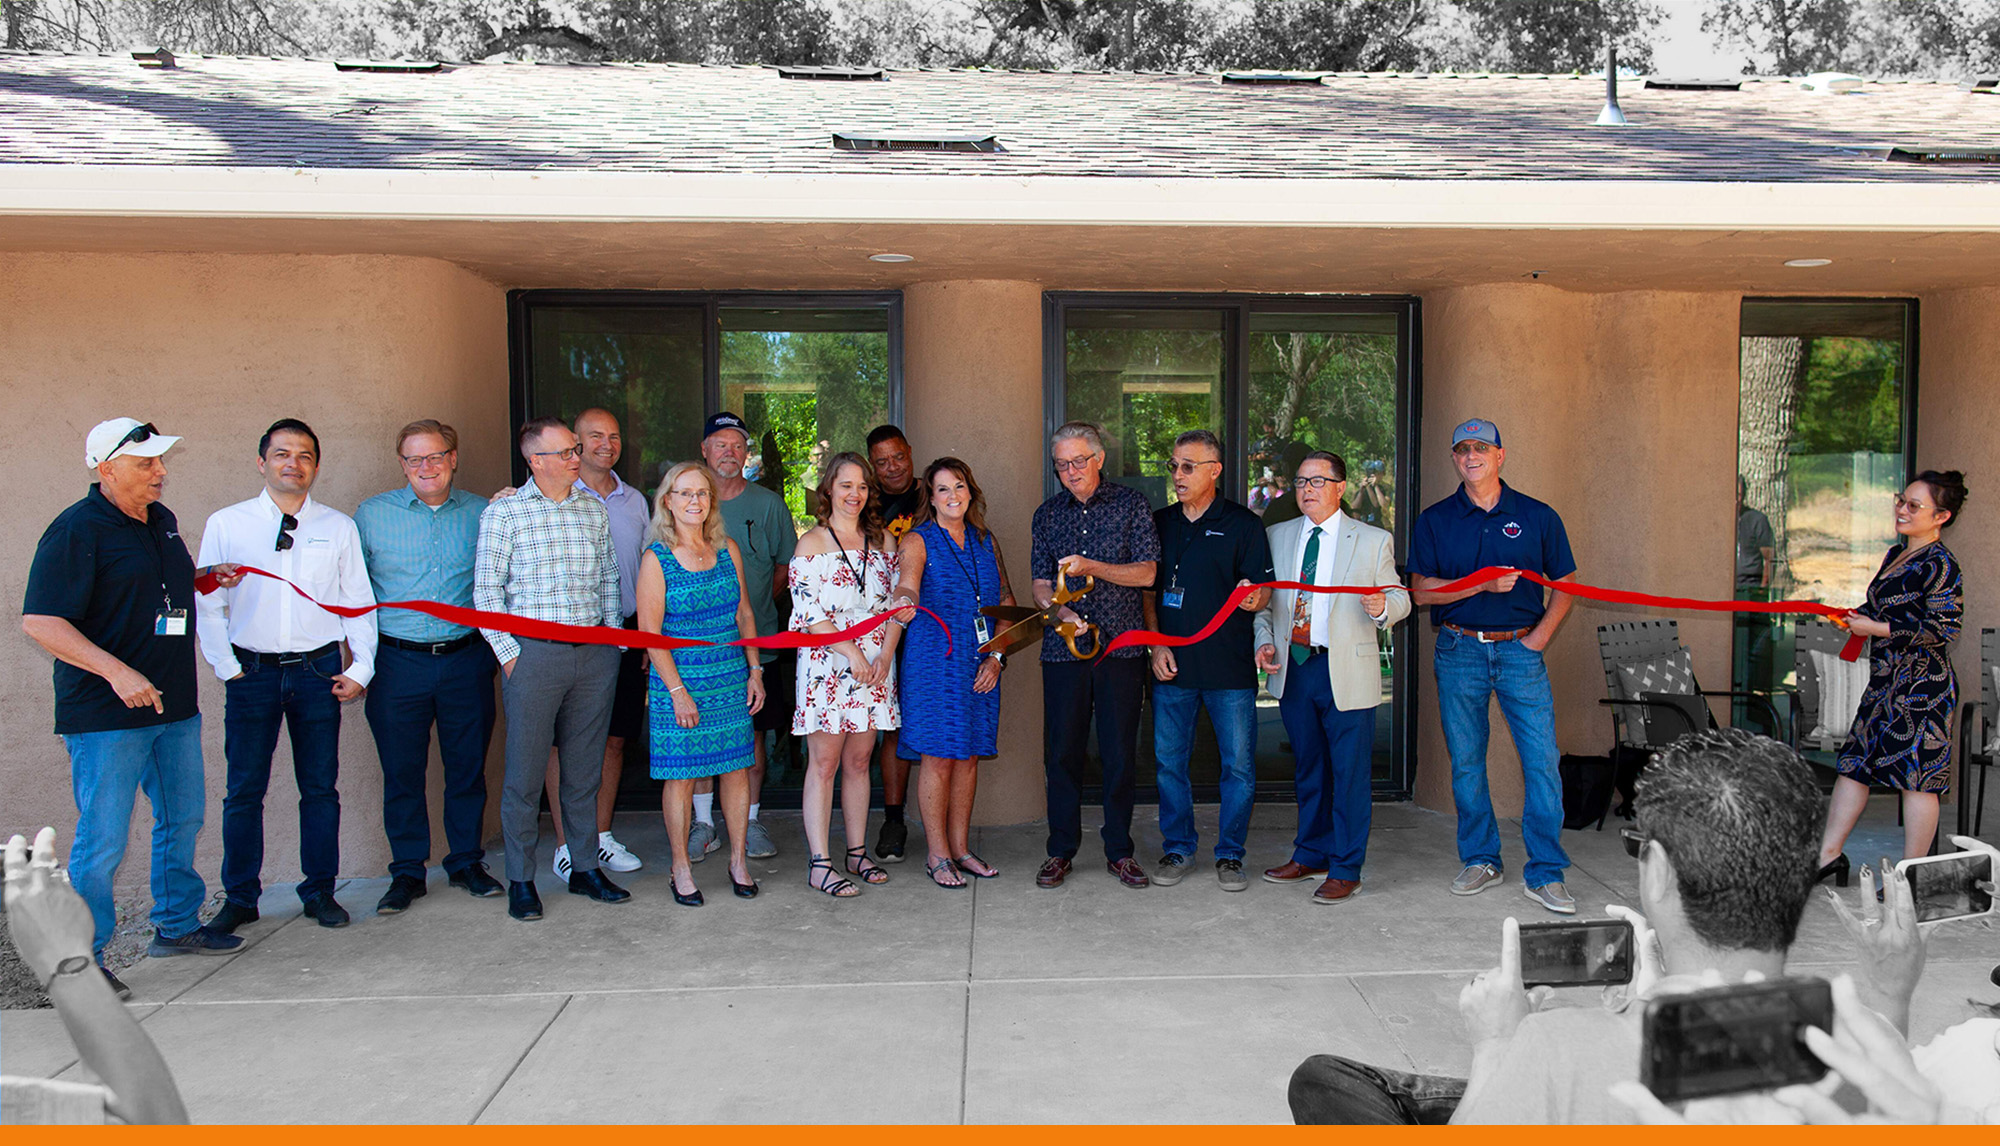 Ribbon cutting at inauguration of California’s first 3D printed house 